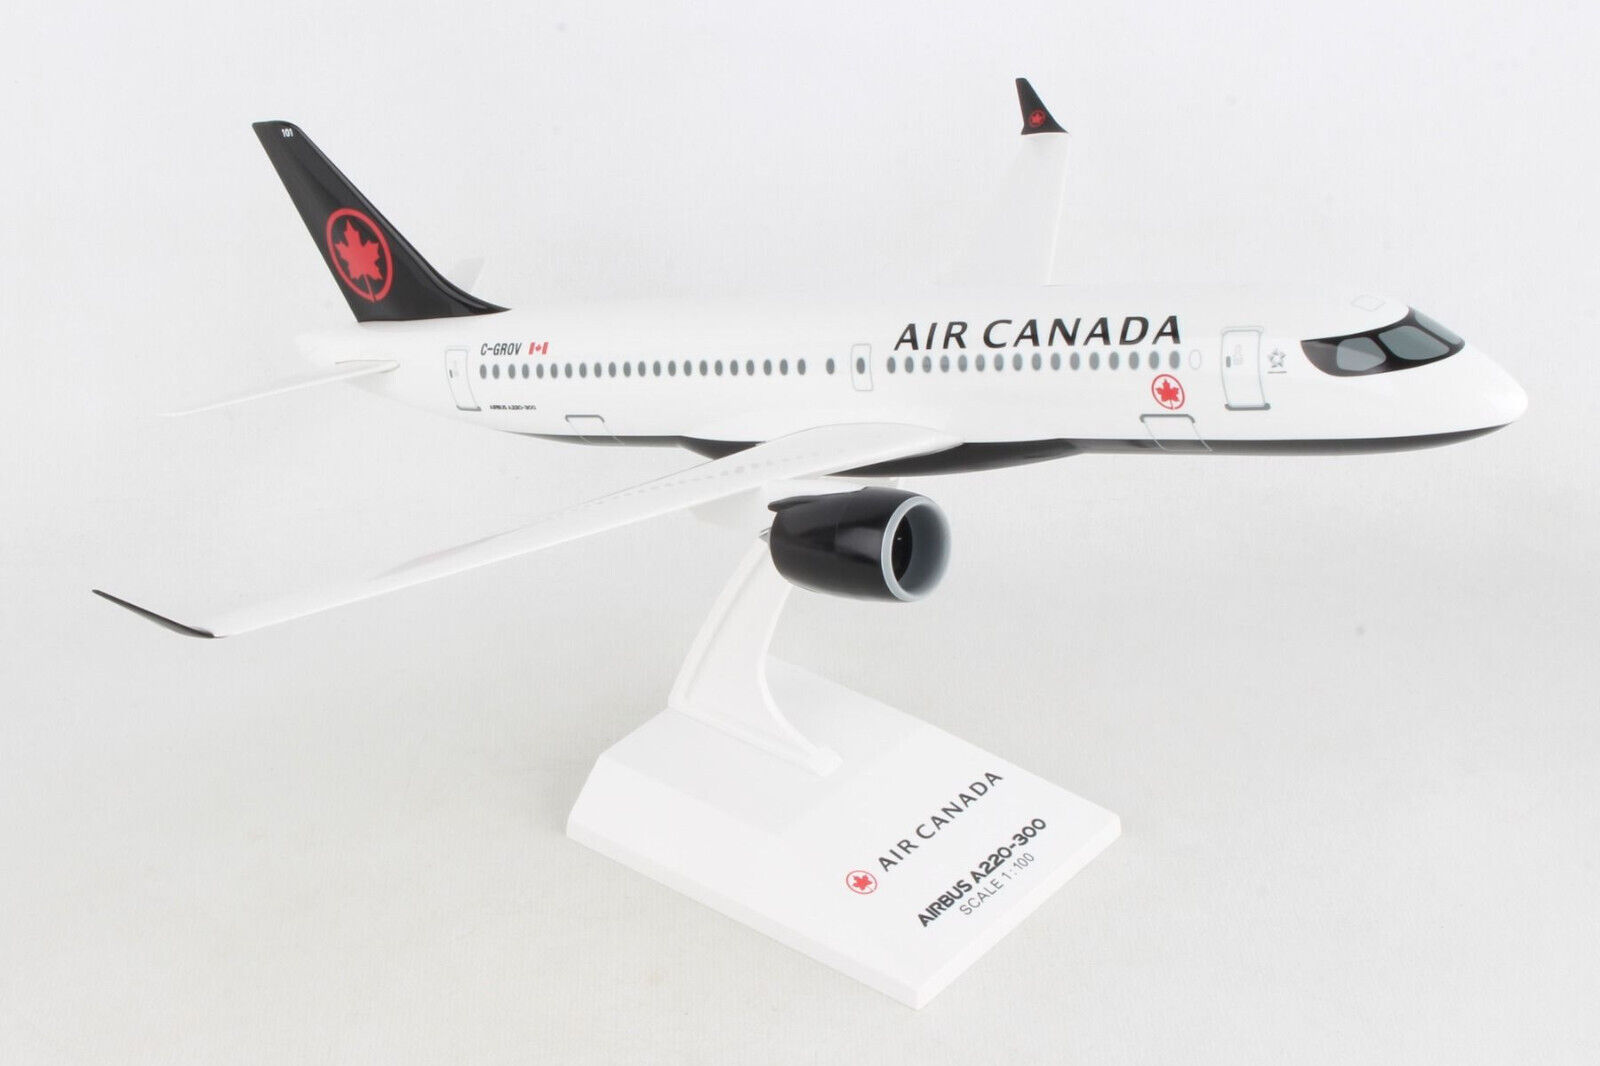 SkyMarks Air Canada Airlines Airbus A200-300 1:100 Scale Model SKR1045